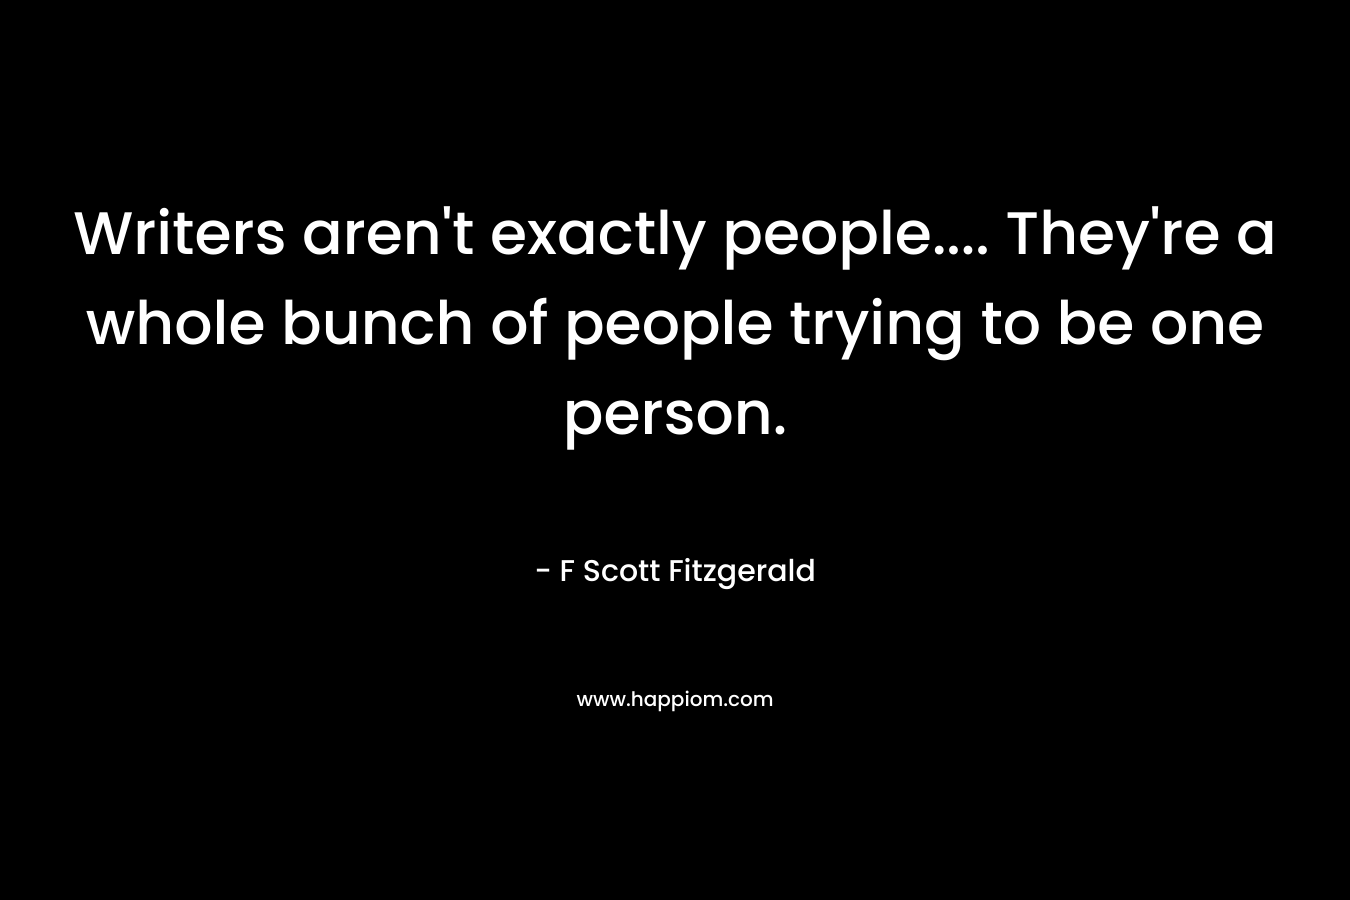 Writers aren't exactly people.... They're a whole bunch of people trying to be one person.